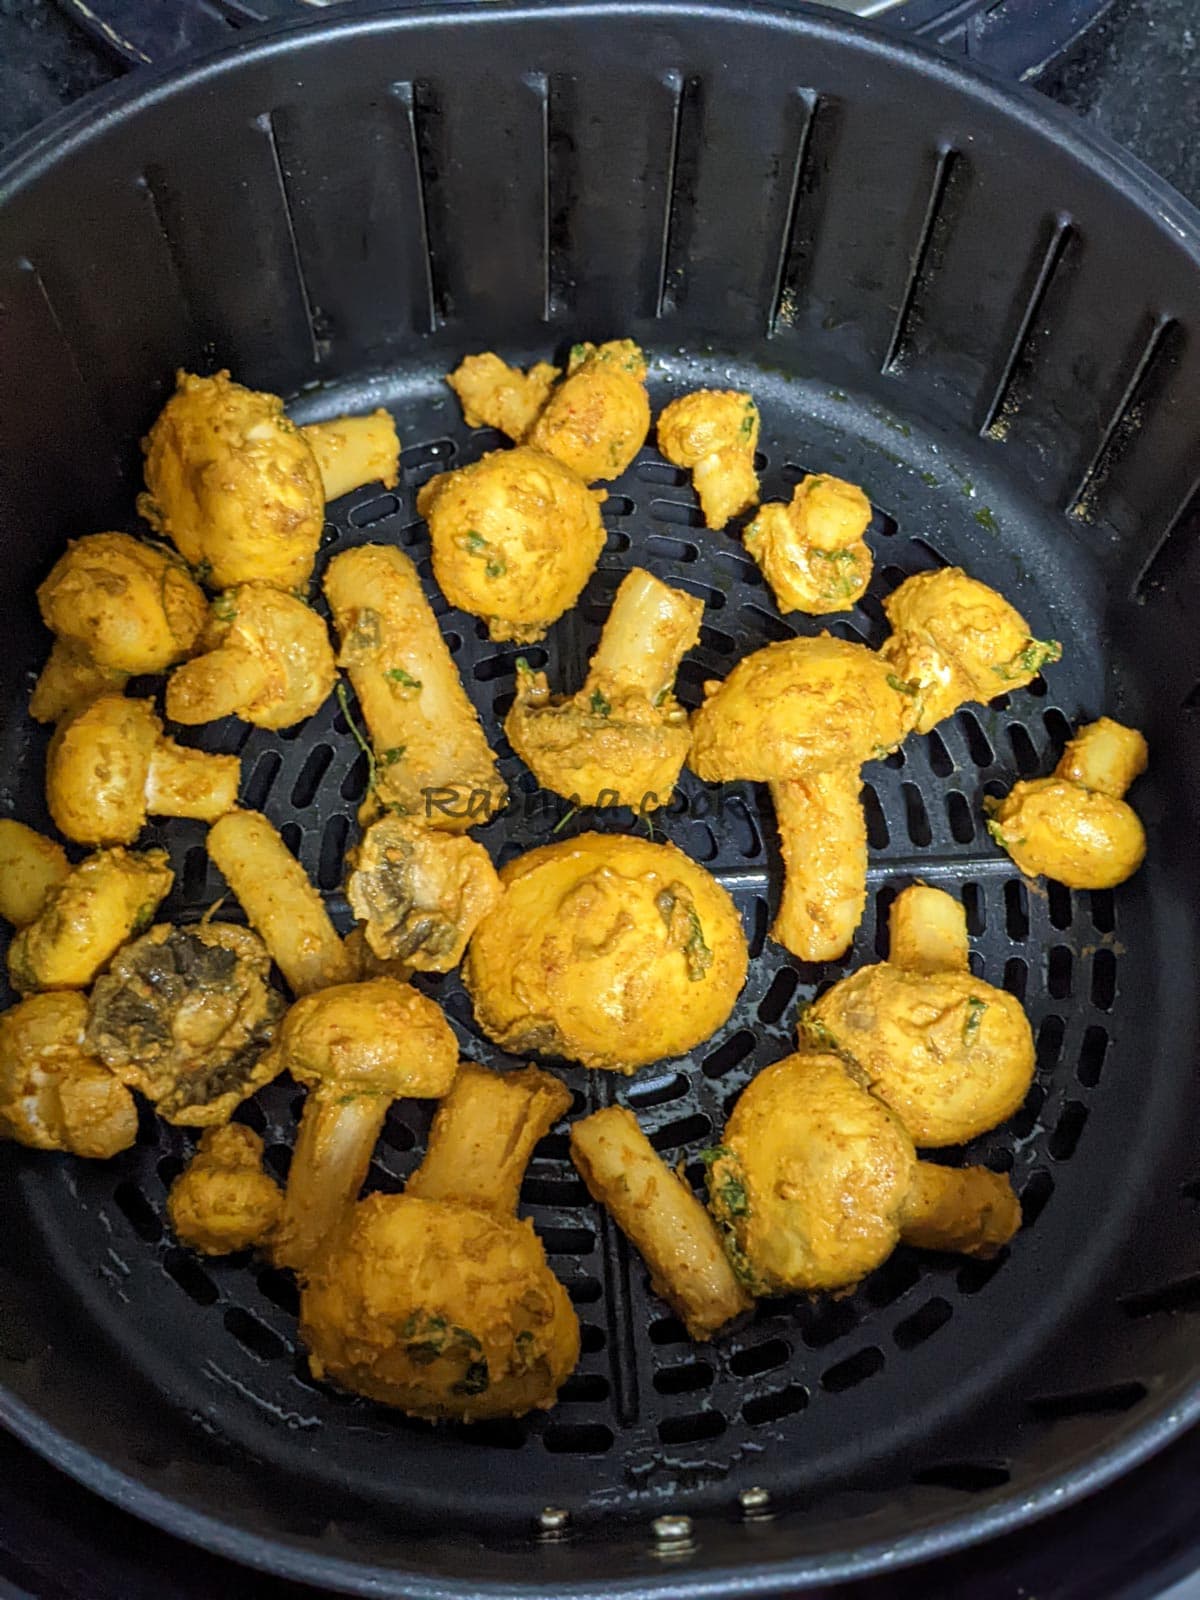 Marinated mushrooms in air fryer basket ready for air frying.